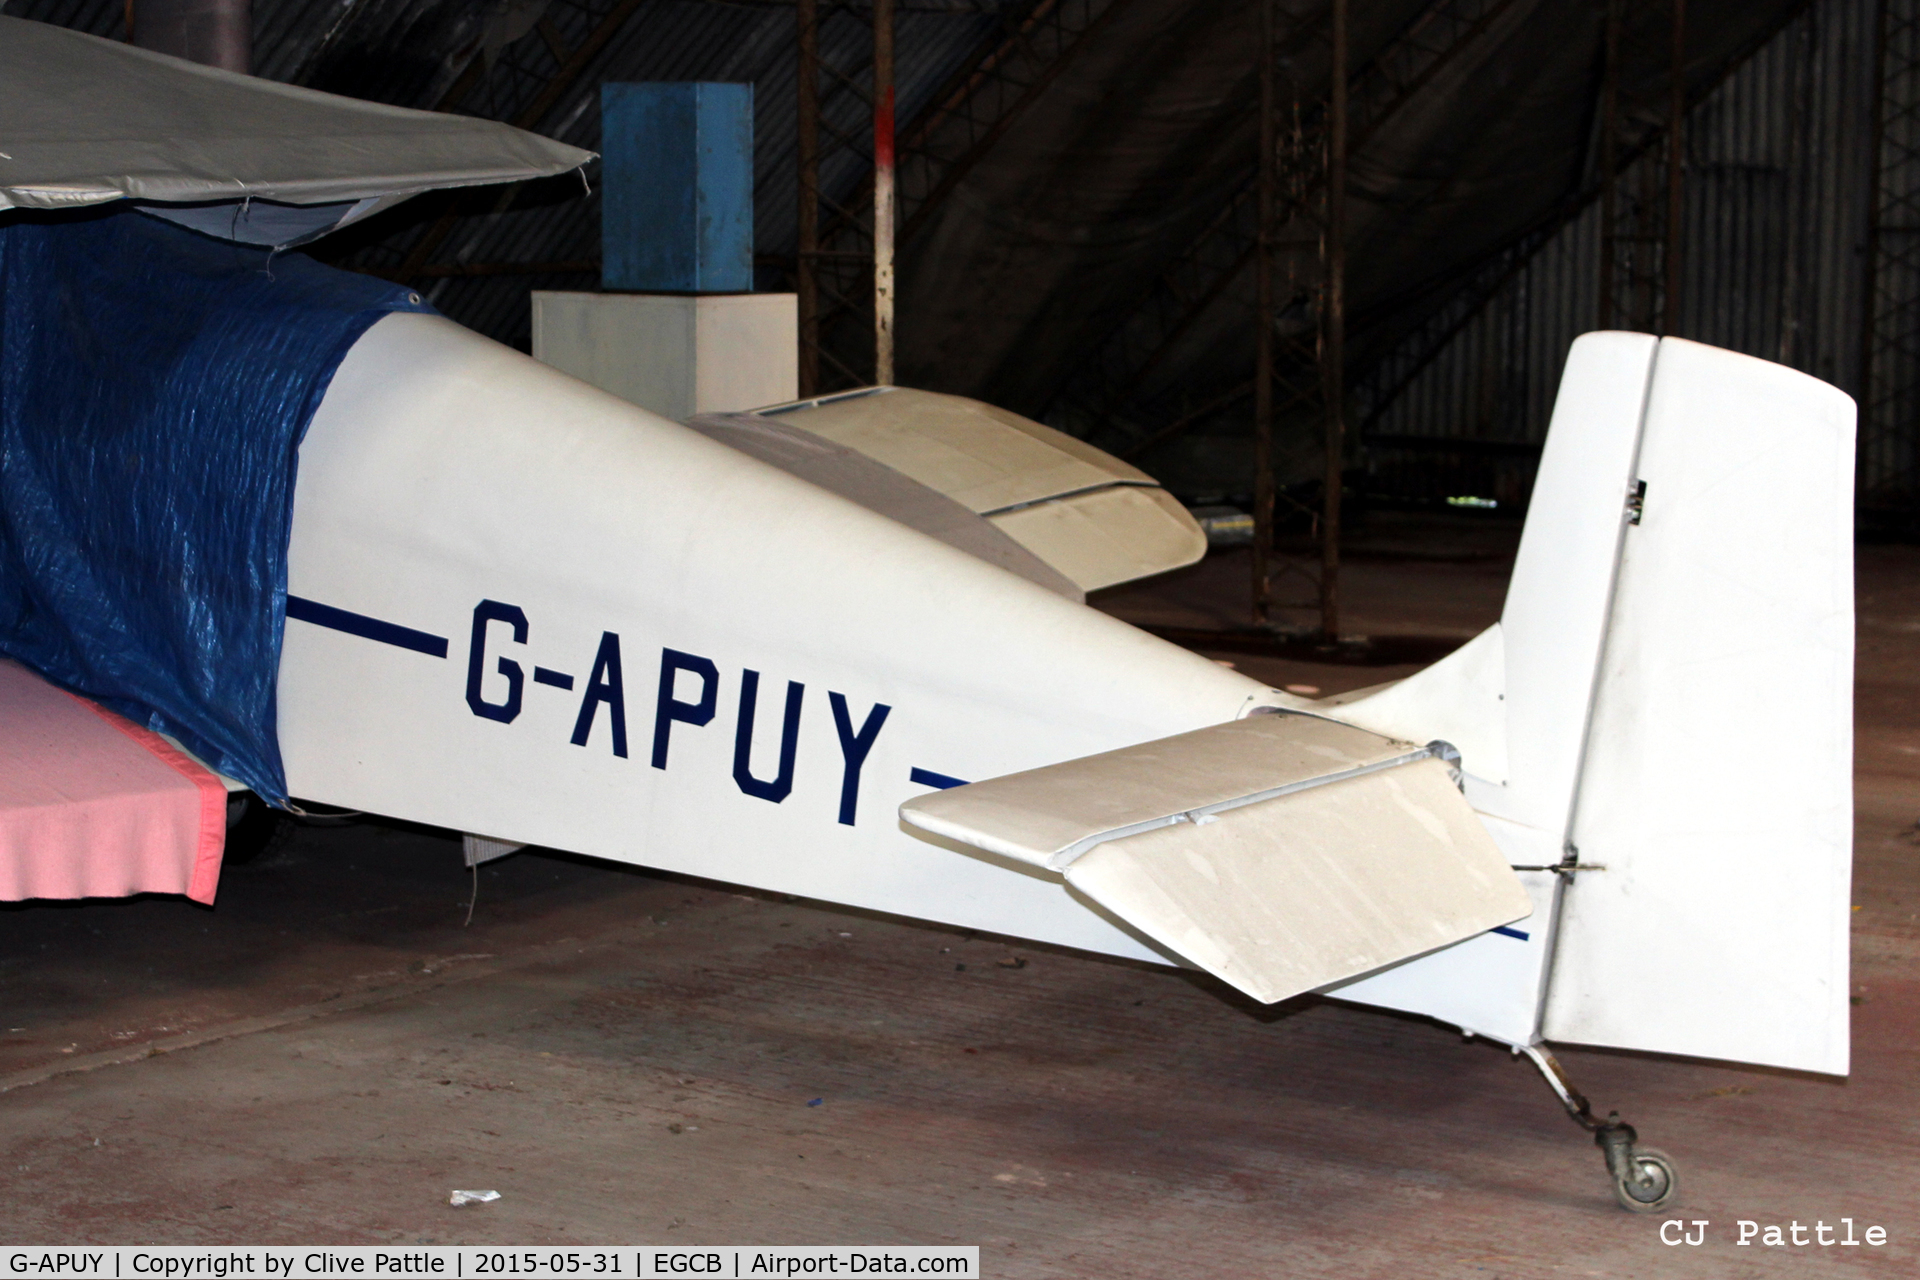 G-APUY, 1963 Druine D.31 Turbulent C/N PFA 509, Hangared in close confines at Barton, the Manchester City Airport, EGCB